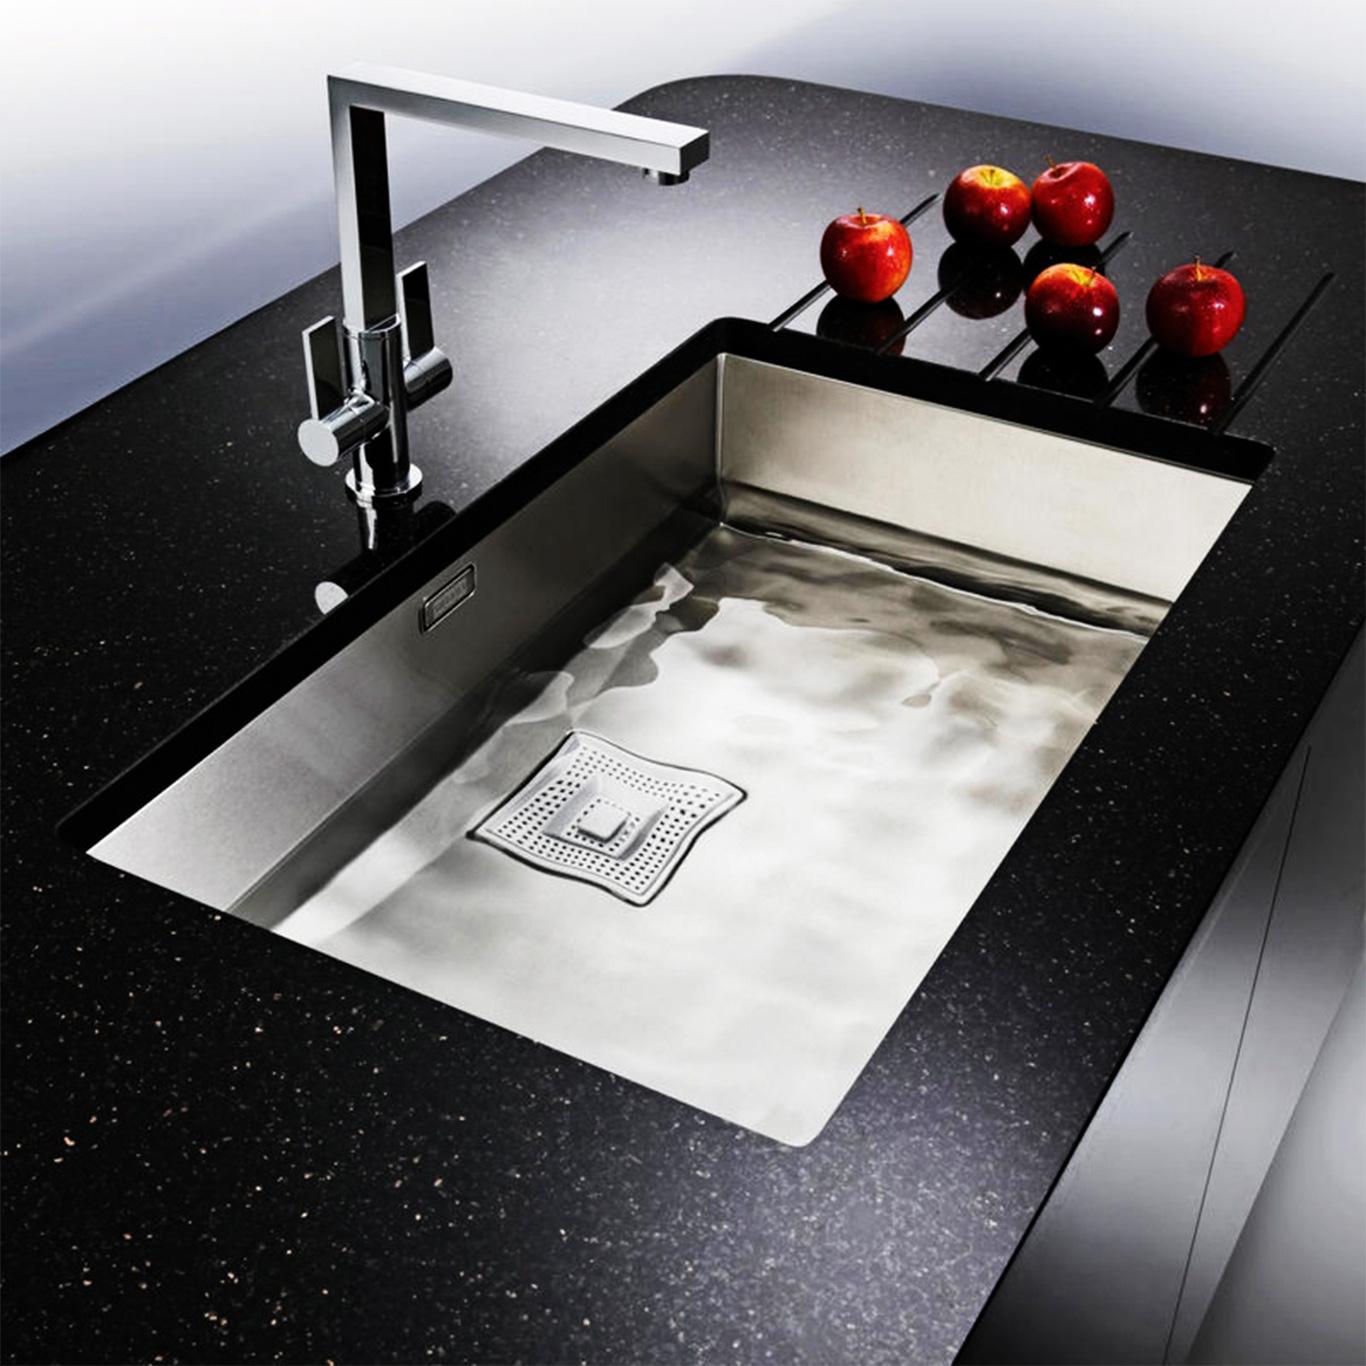 Dark Countertop Undermount Modern Dark Countertop And Stylish Under Mount Stainless Steel Kitchen Sink On Long Counter Near White Wall Kitchens Simple Undermount Stainless Steel Kitchen Sinks You Have To Know